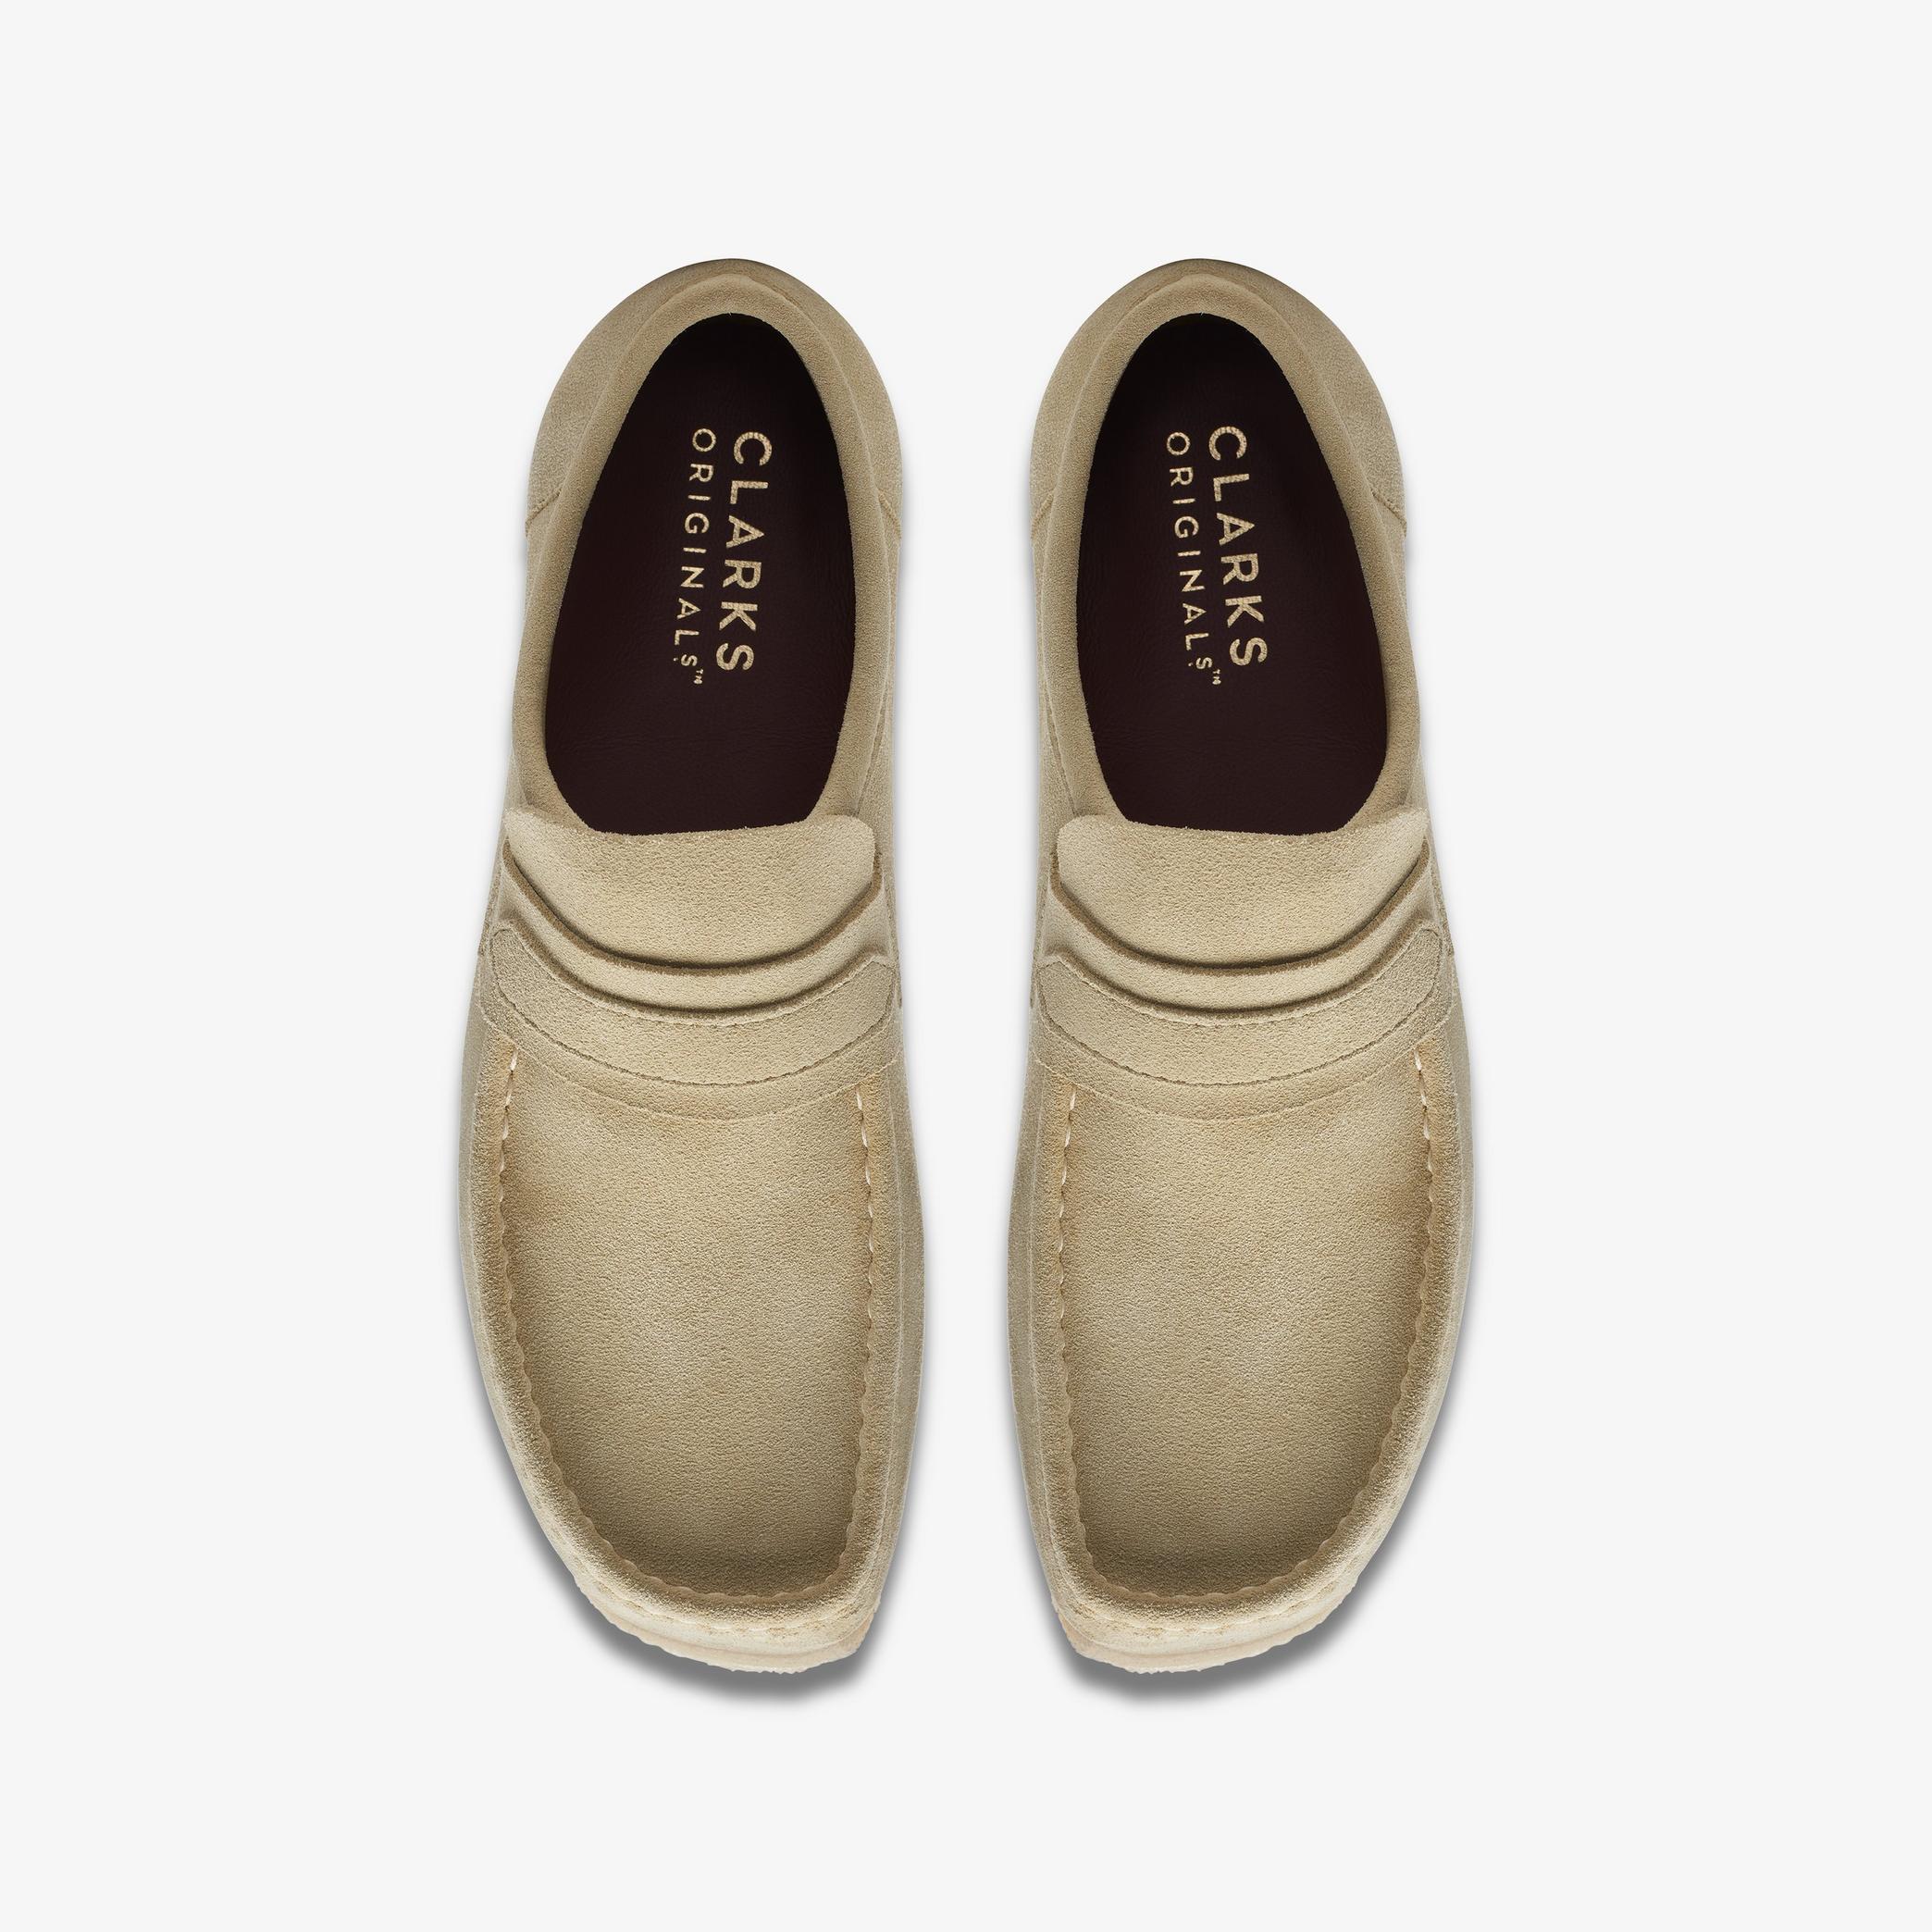 Wallabee Loafer Maple Suede Loafers, view 6 of 6